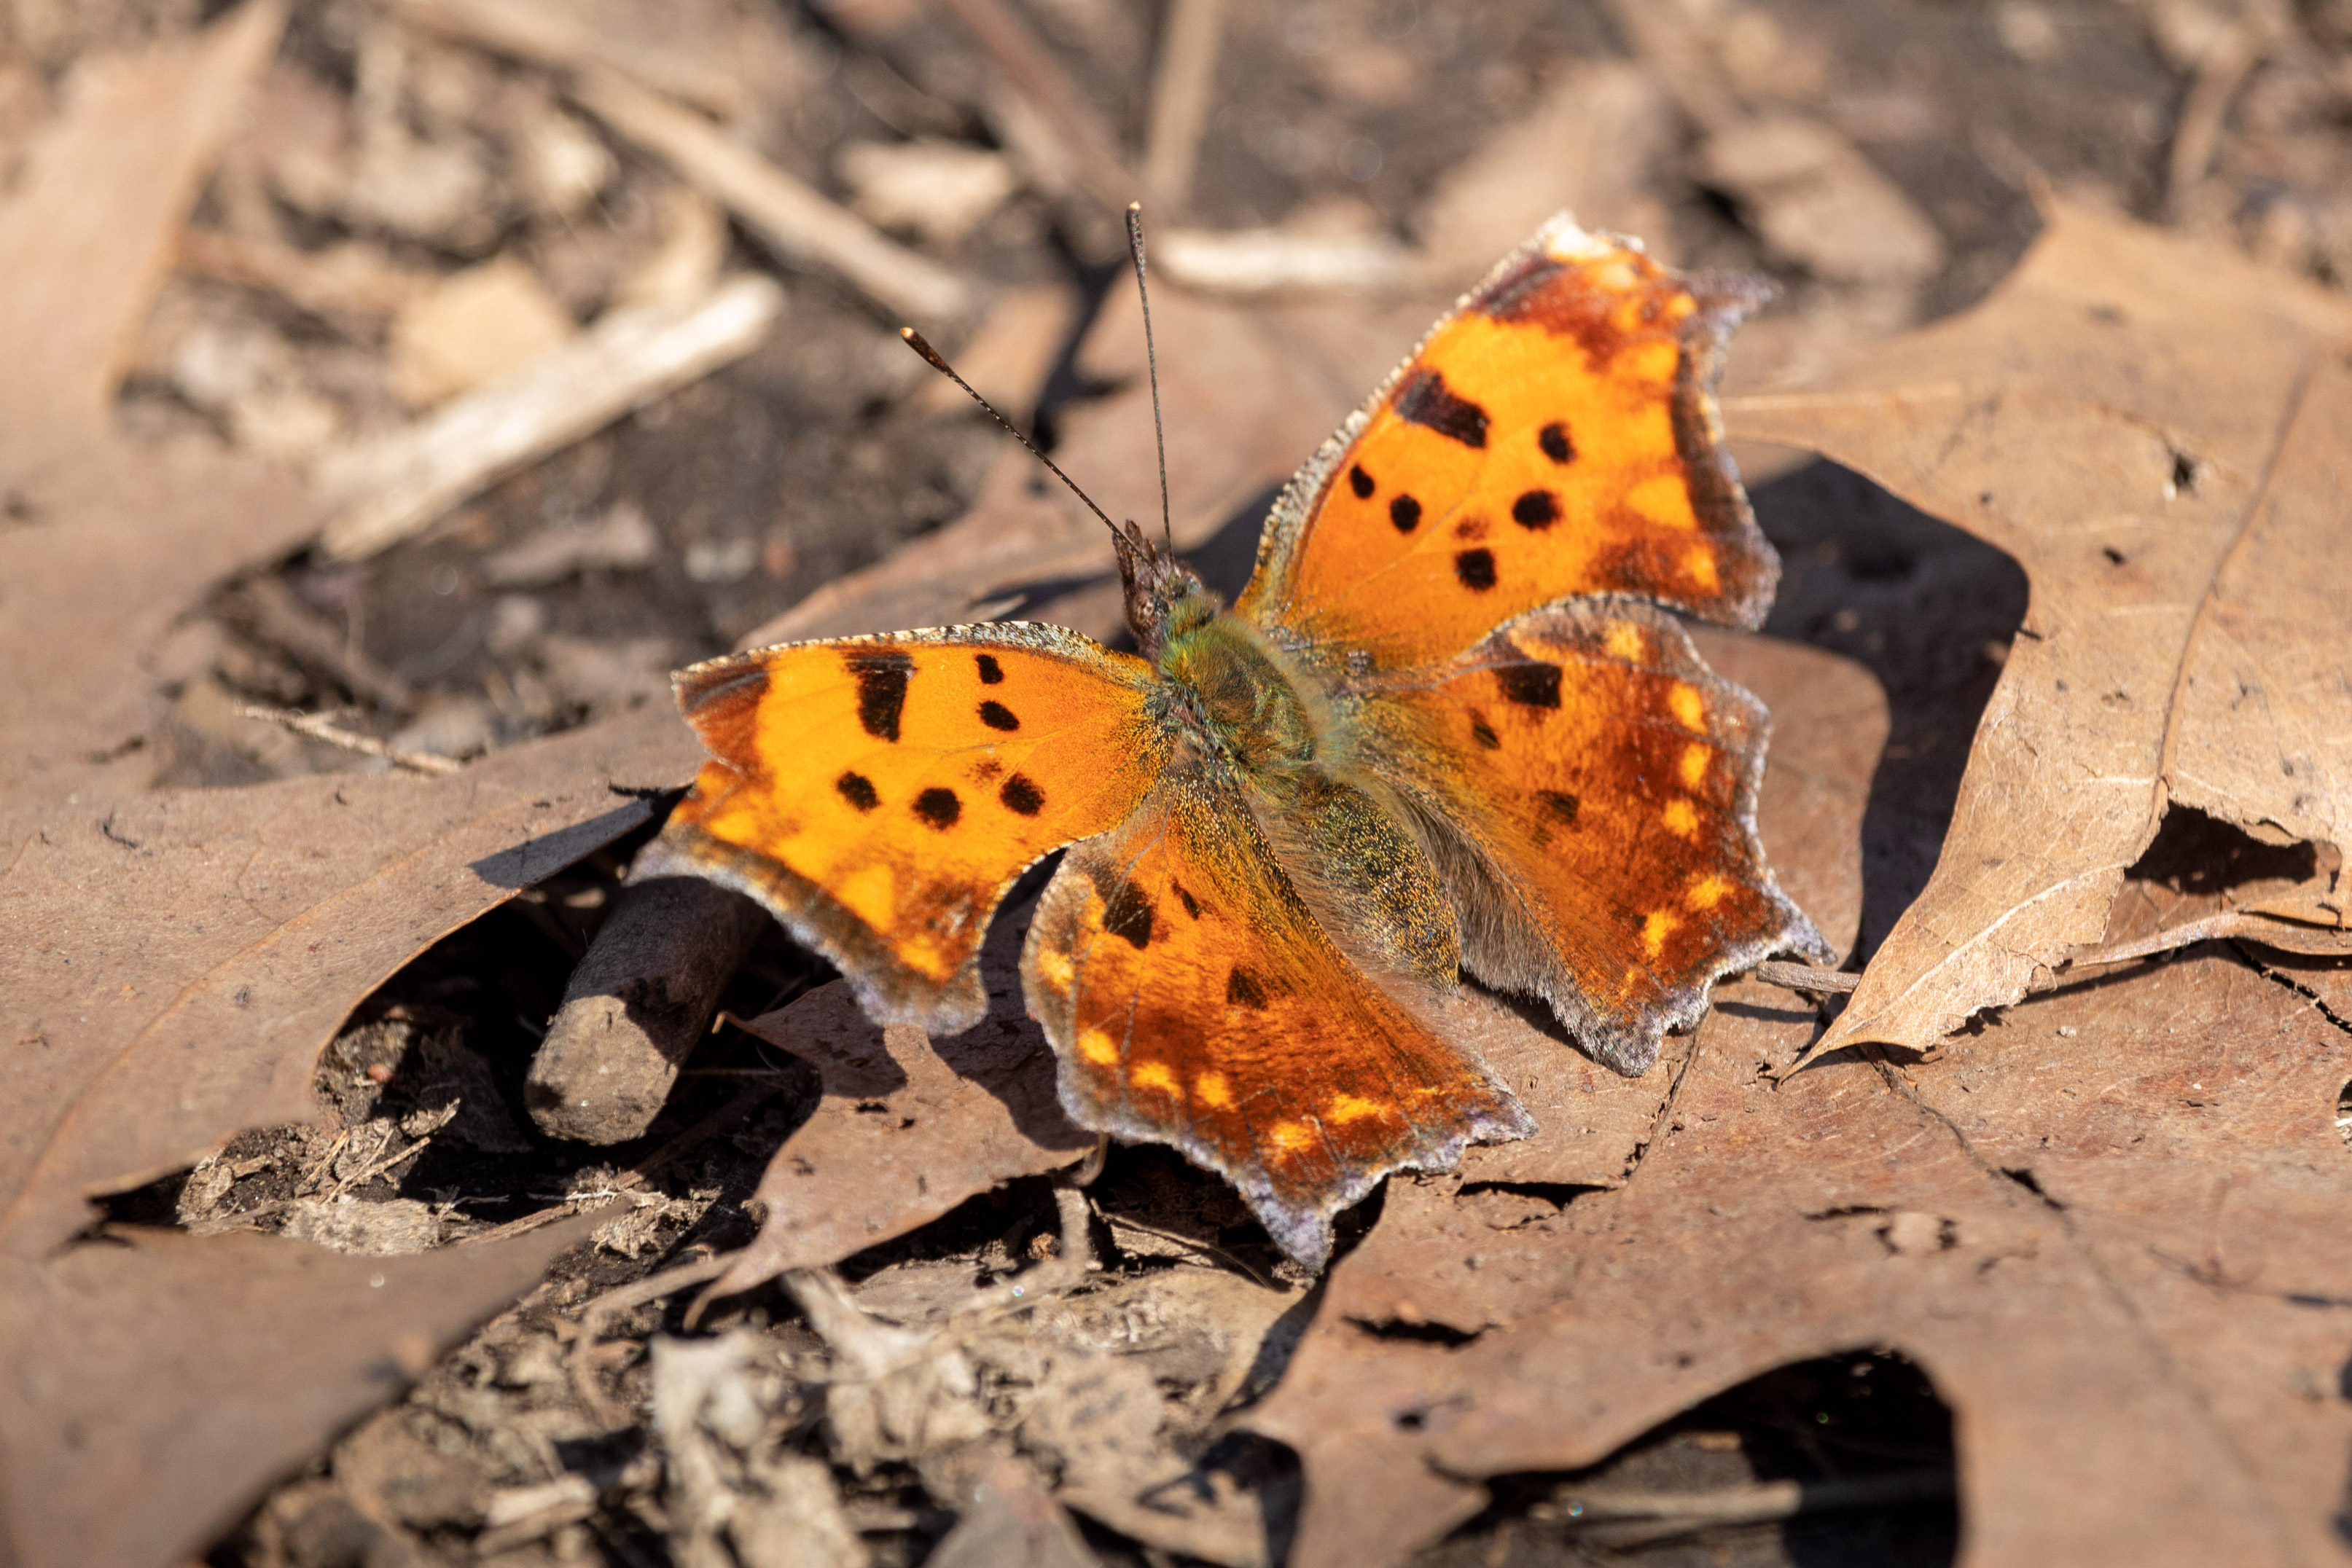 Fuzzy orange butterfly with black spots sitting on the leaf-covered ground